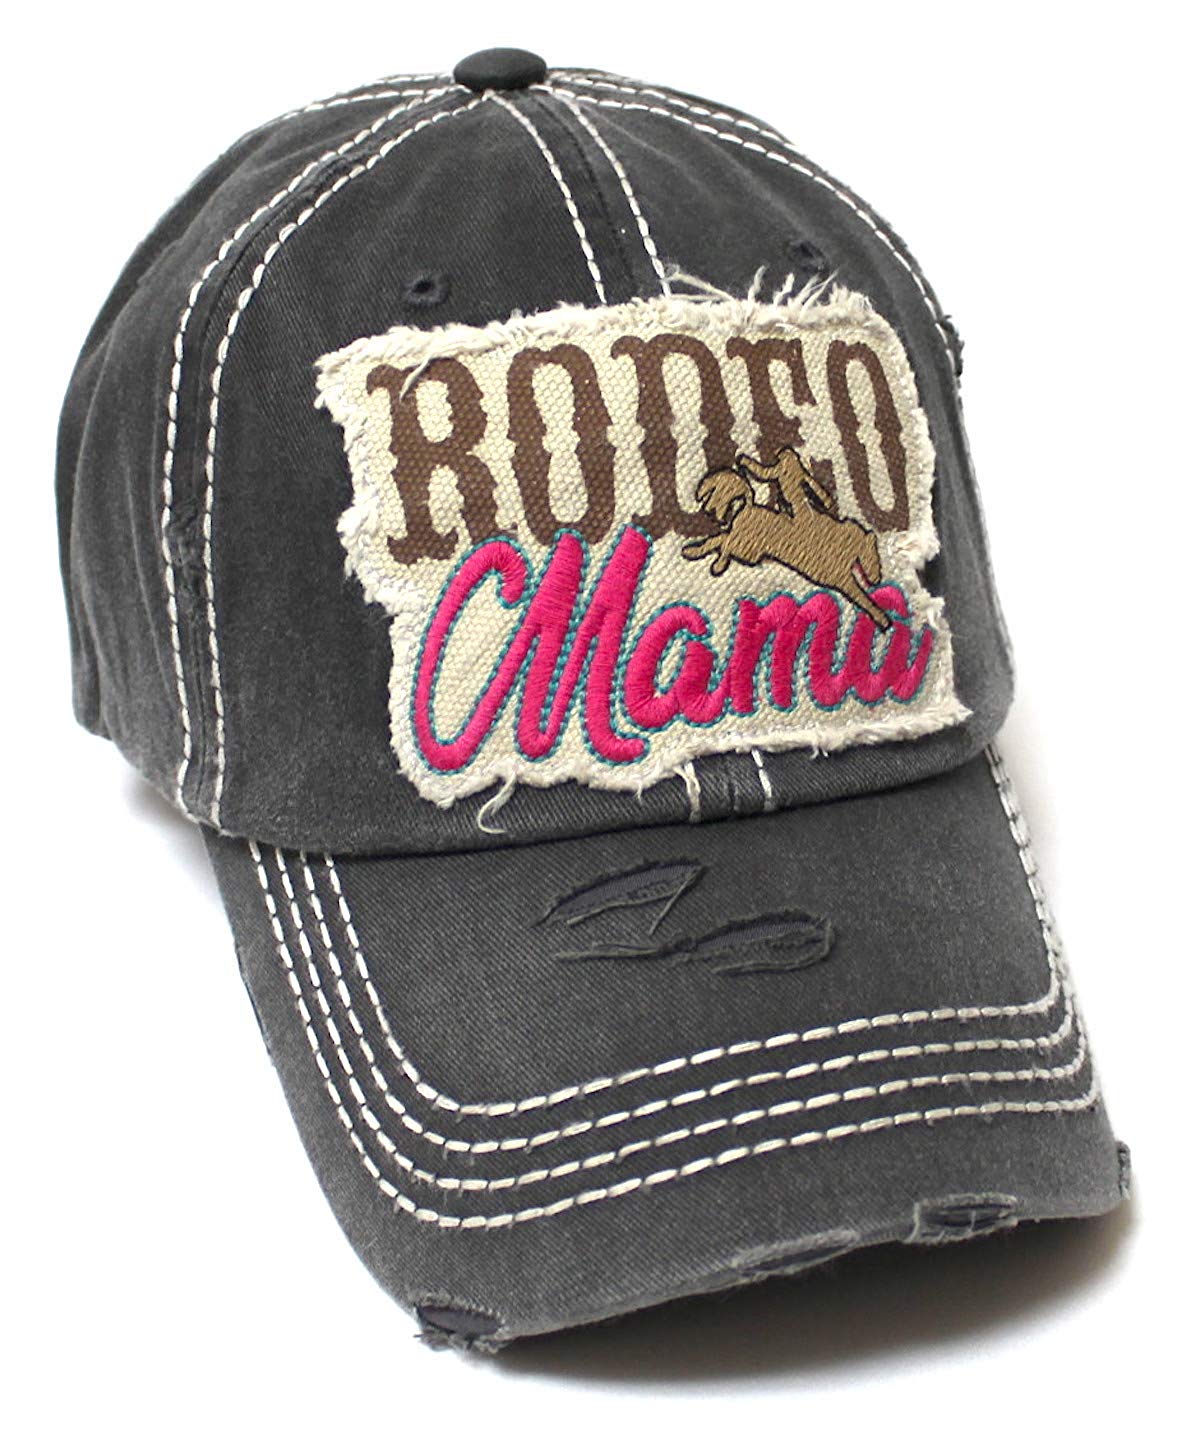 Classic Country Western Ballcap Rodeo Mama Monogram Patch Embroidery Adjustable Baseball Hat, Vintage Black - Caps 'N Vintage 